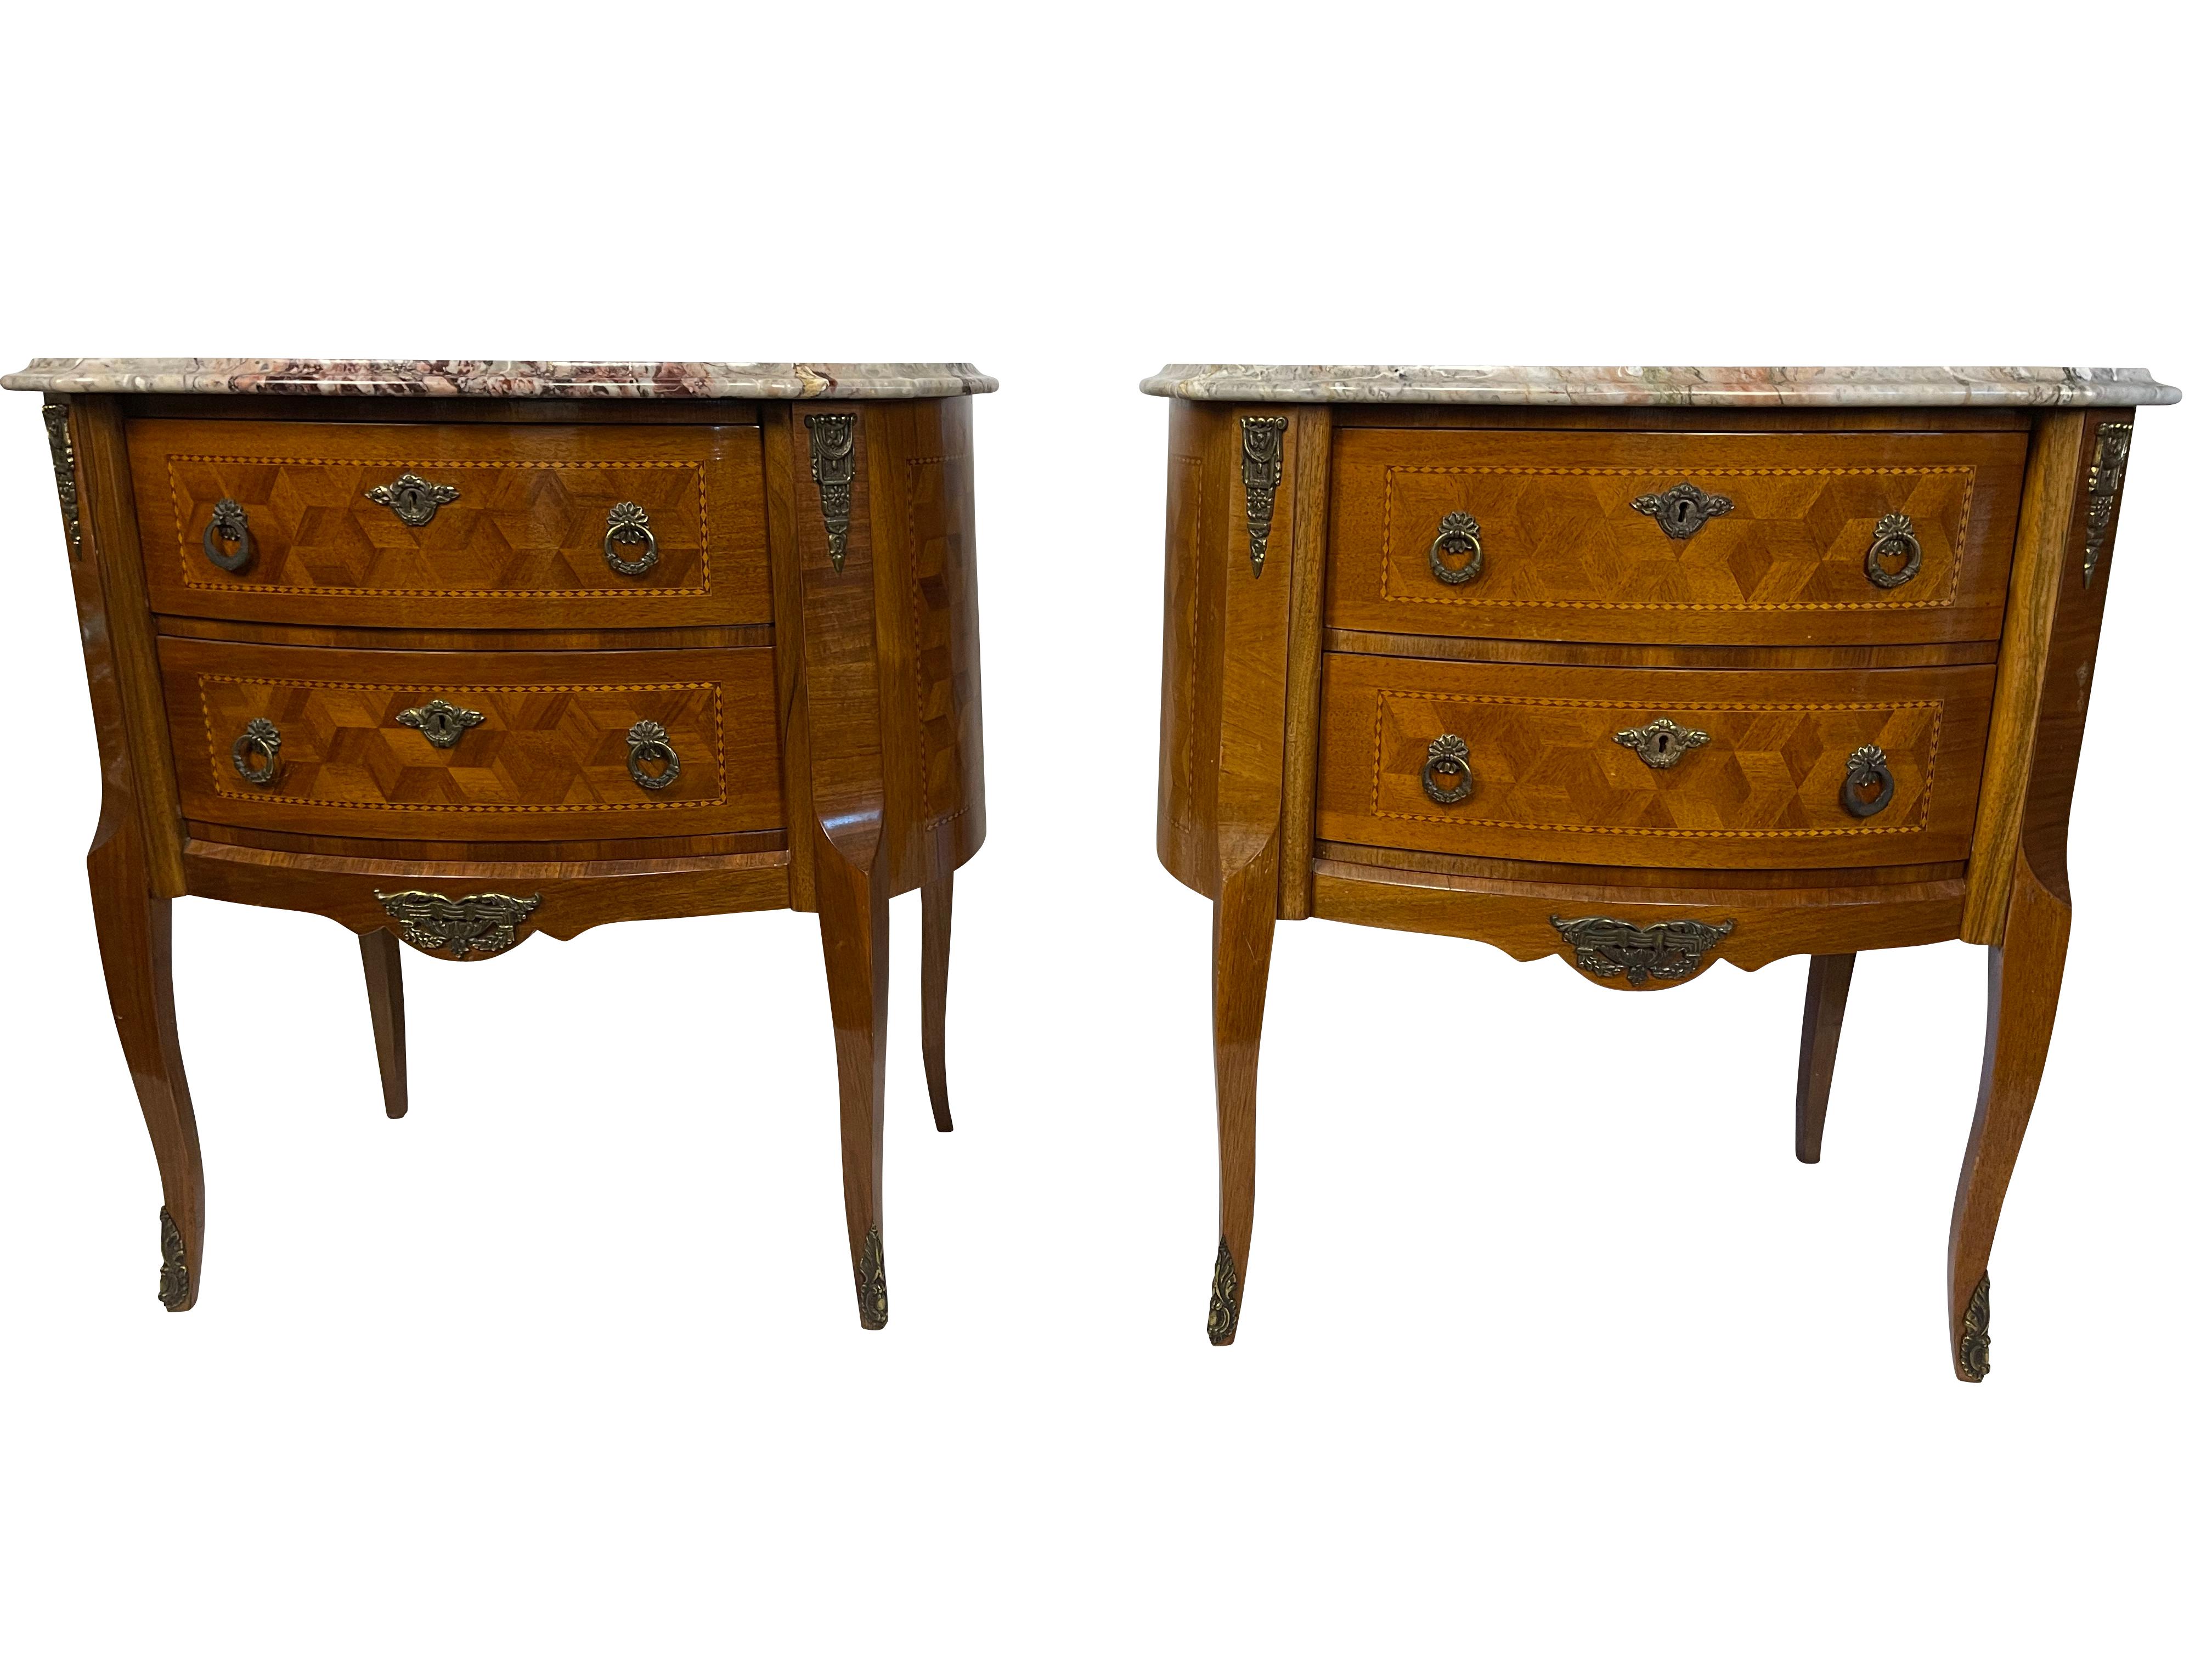 Pair of French Louis XV marquetry bedroom side tables with beautiful ormolu mounts, marquetry inlay, original key, and grey veined marble tops. Made in Yugoslavia 1940-1950 in excellent condition. Very nice larger size as bedroom side tables or in a